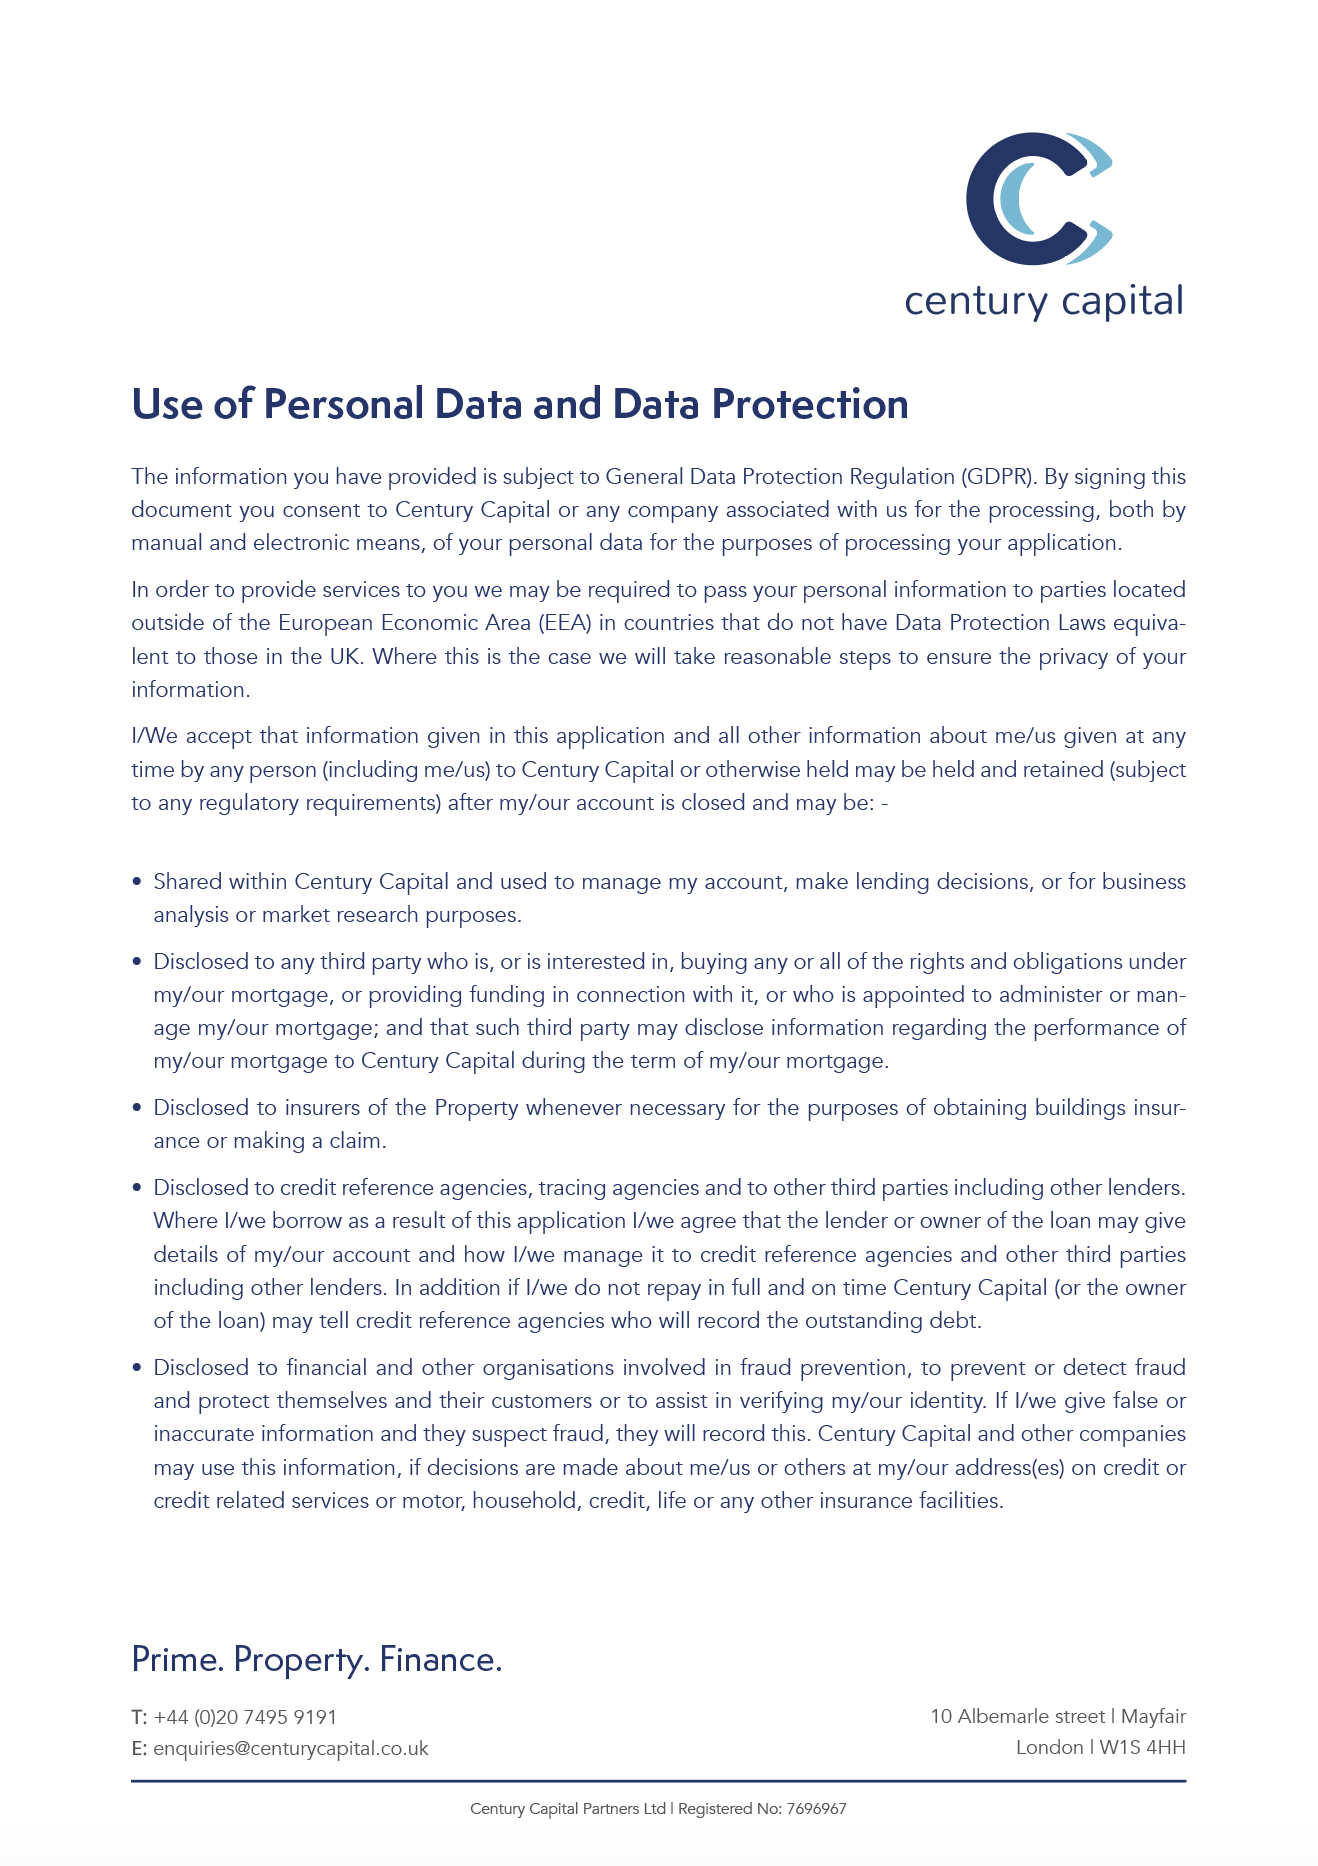 Use of Personal Data and DP Declaration